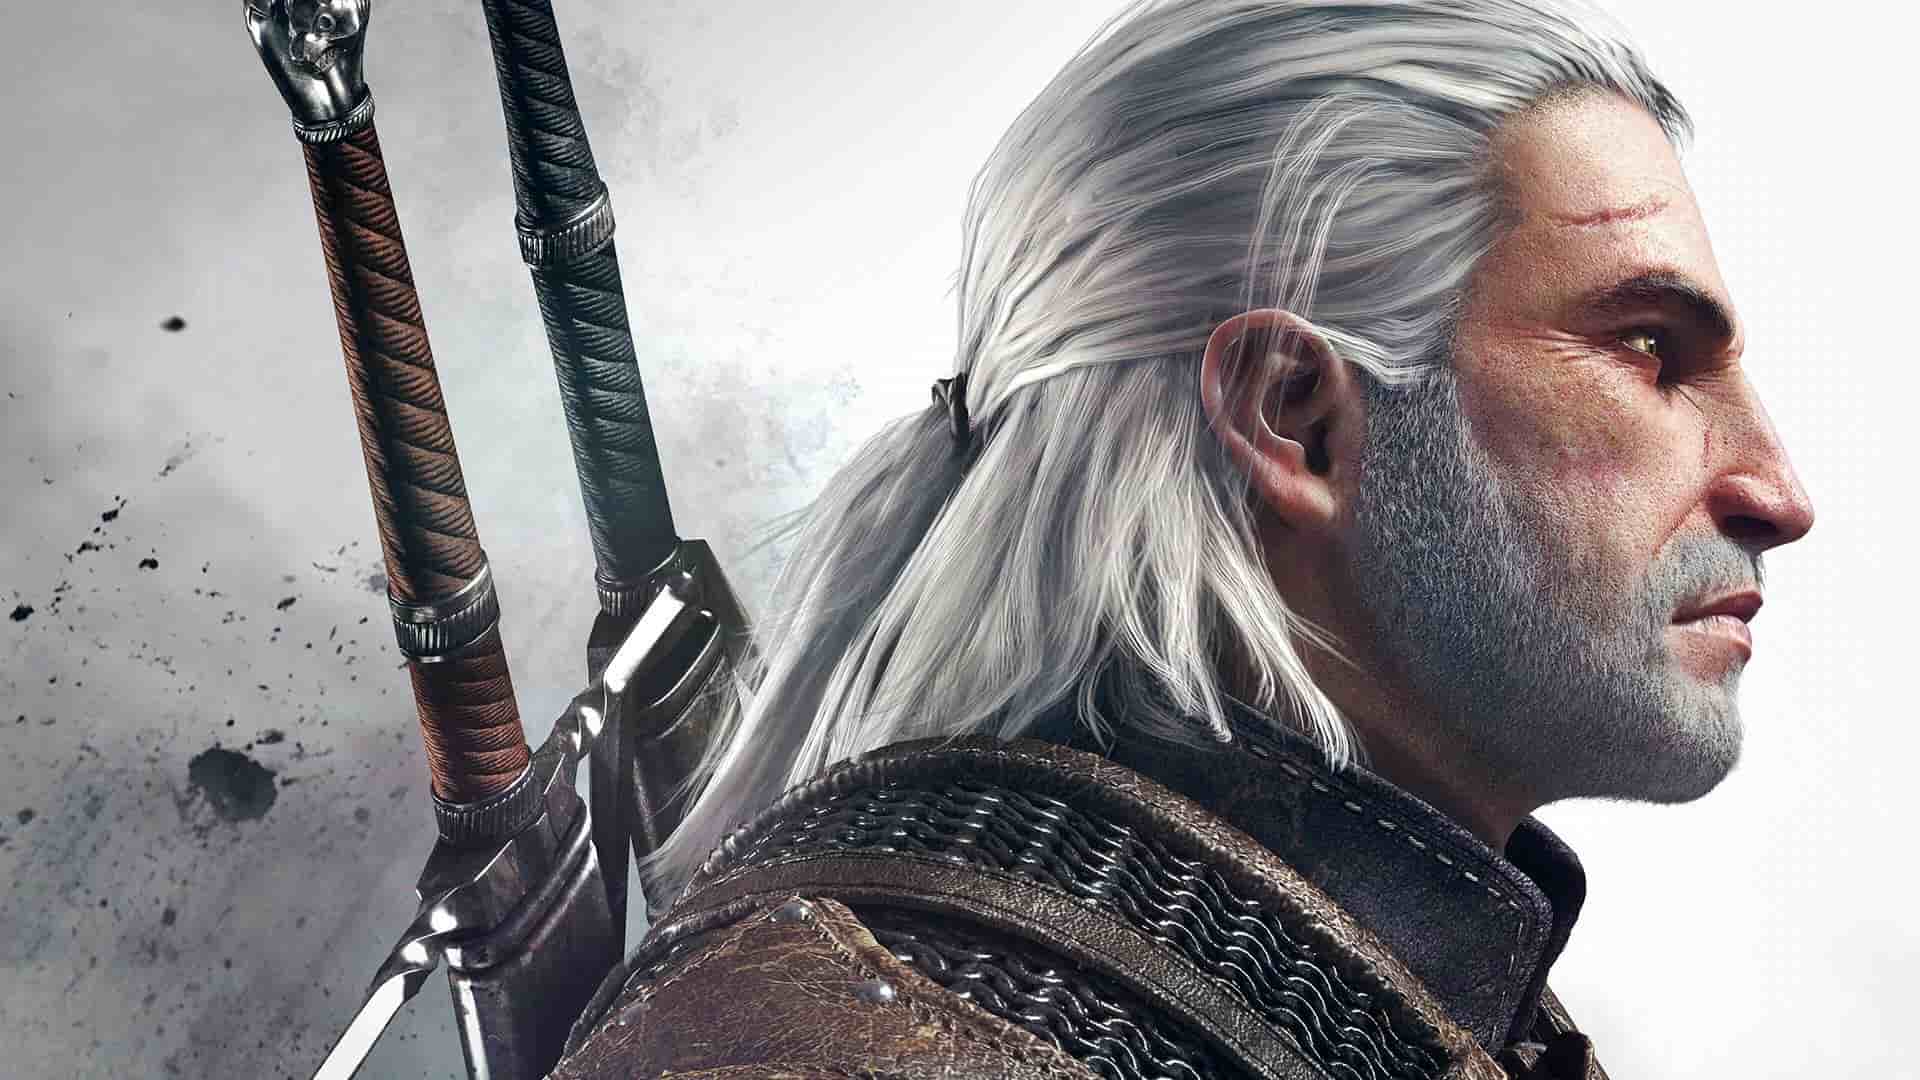 SoulCalibur VI Geralt Showcase Talks About Character Moves, and More